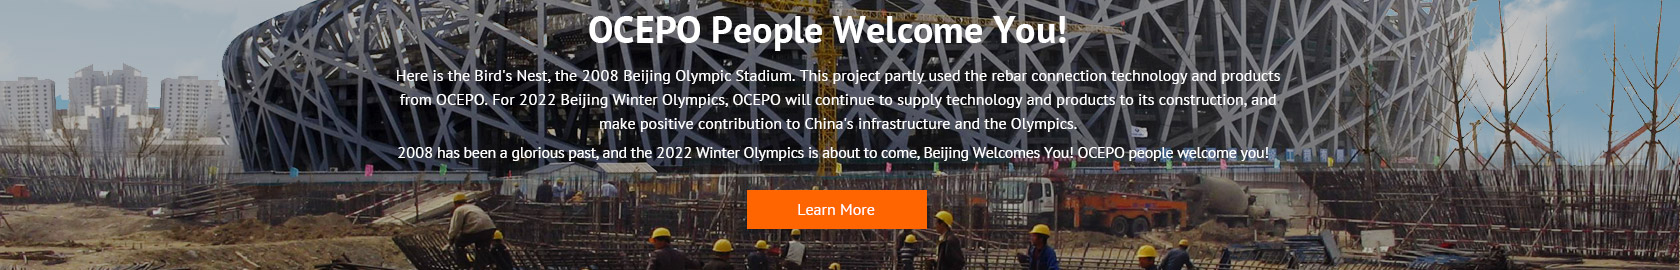 OCEPO people welcome you